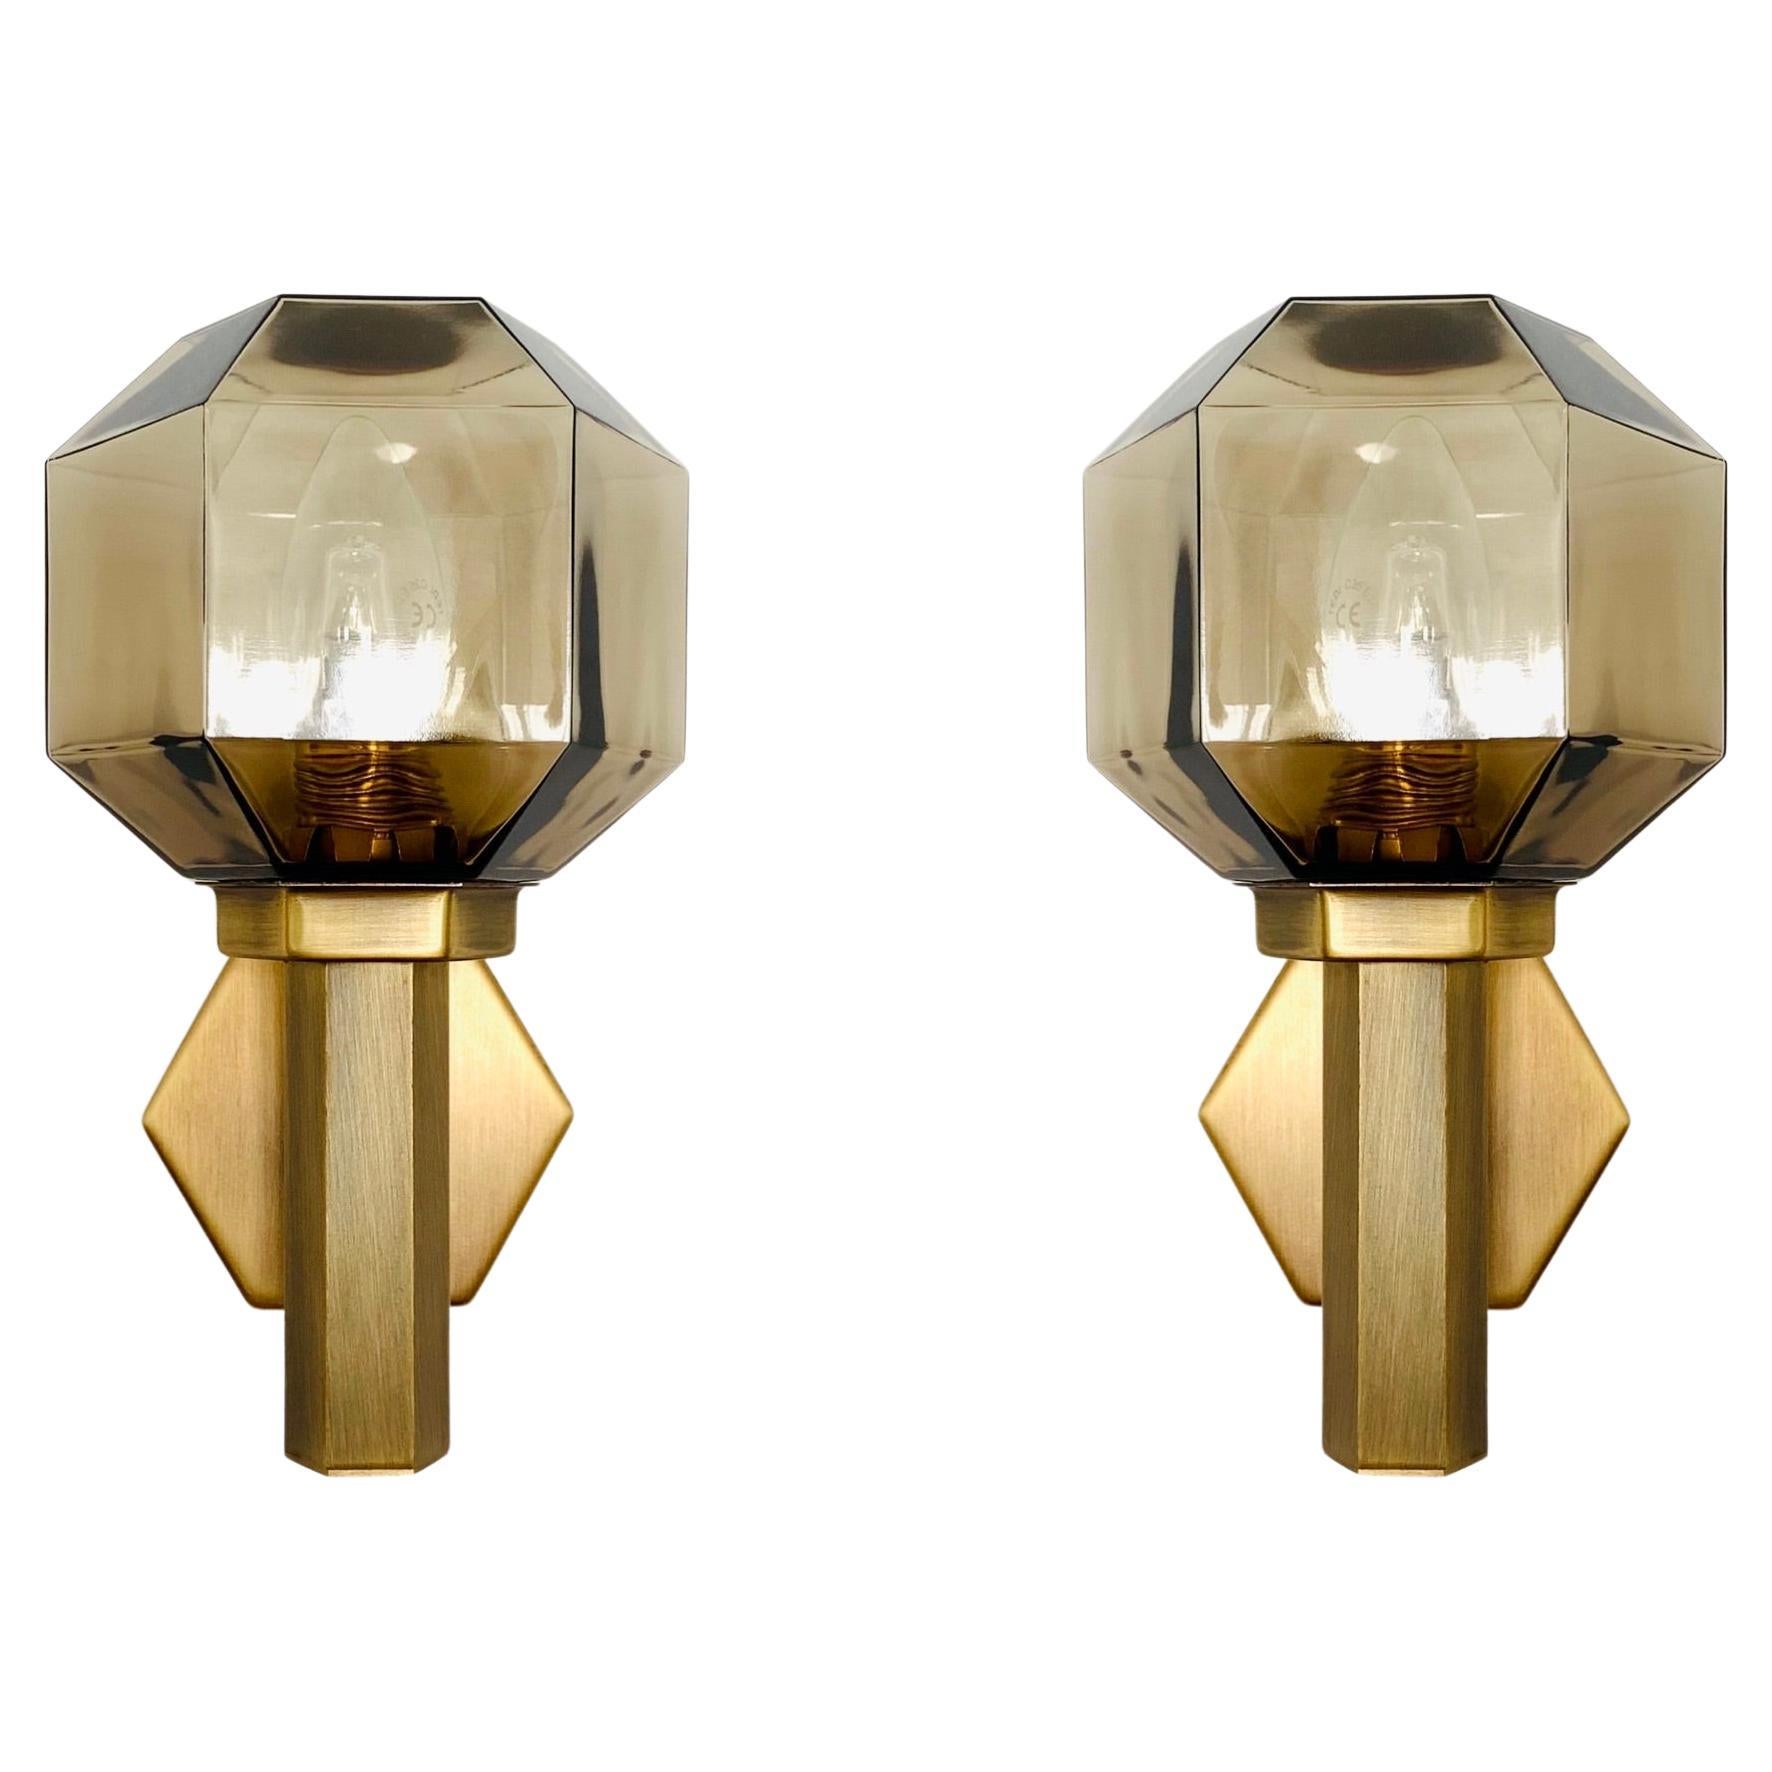 Set of 2 Golden Smoked Glass Wall Lamps from Hillebrand